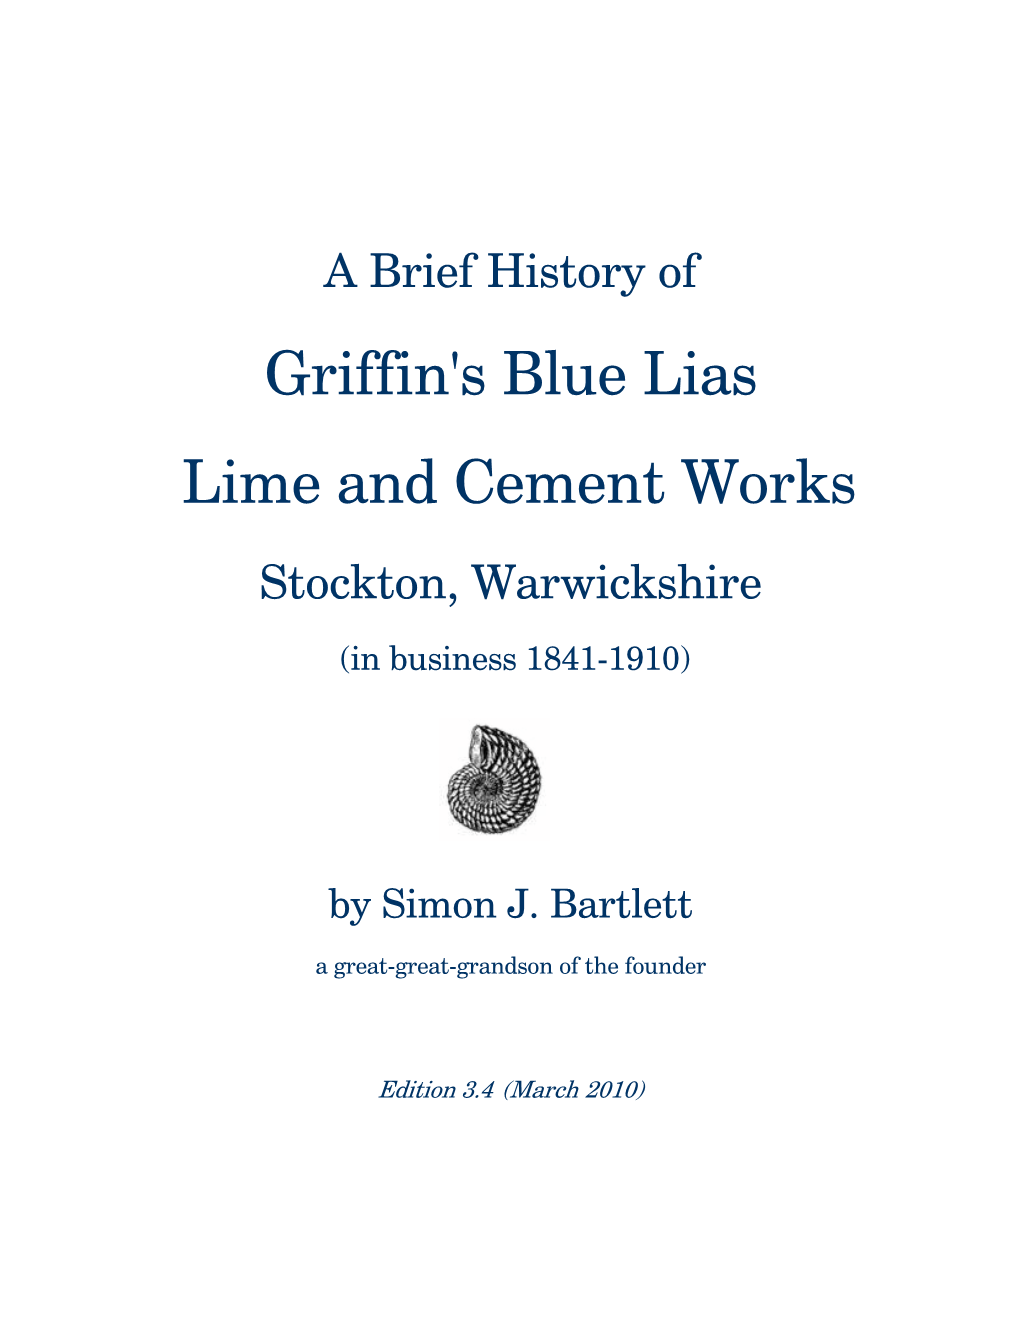 Griffin's Blue Lias Lime and Cement Works Stockton, Warwickshire